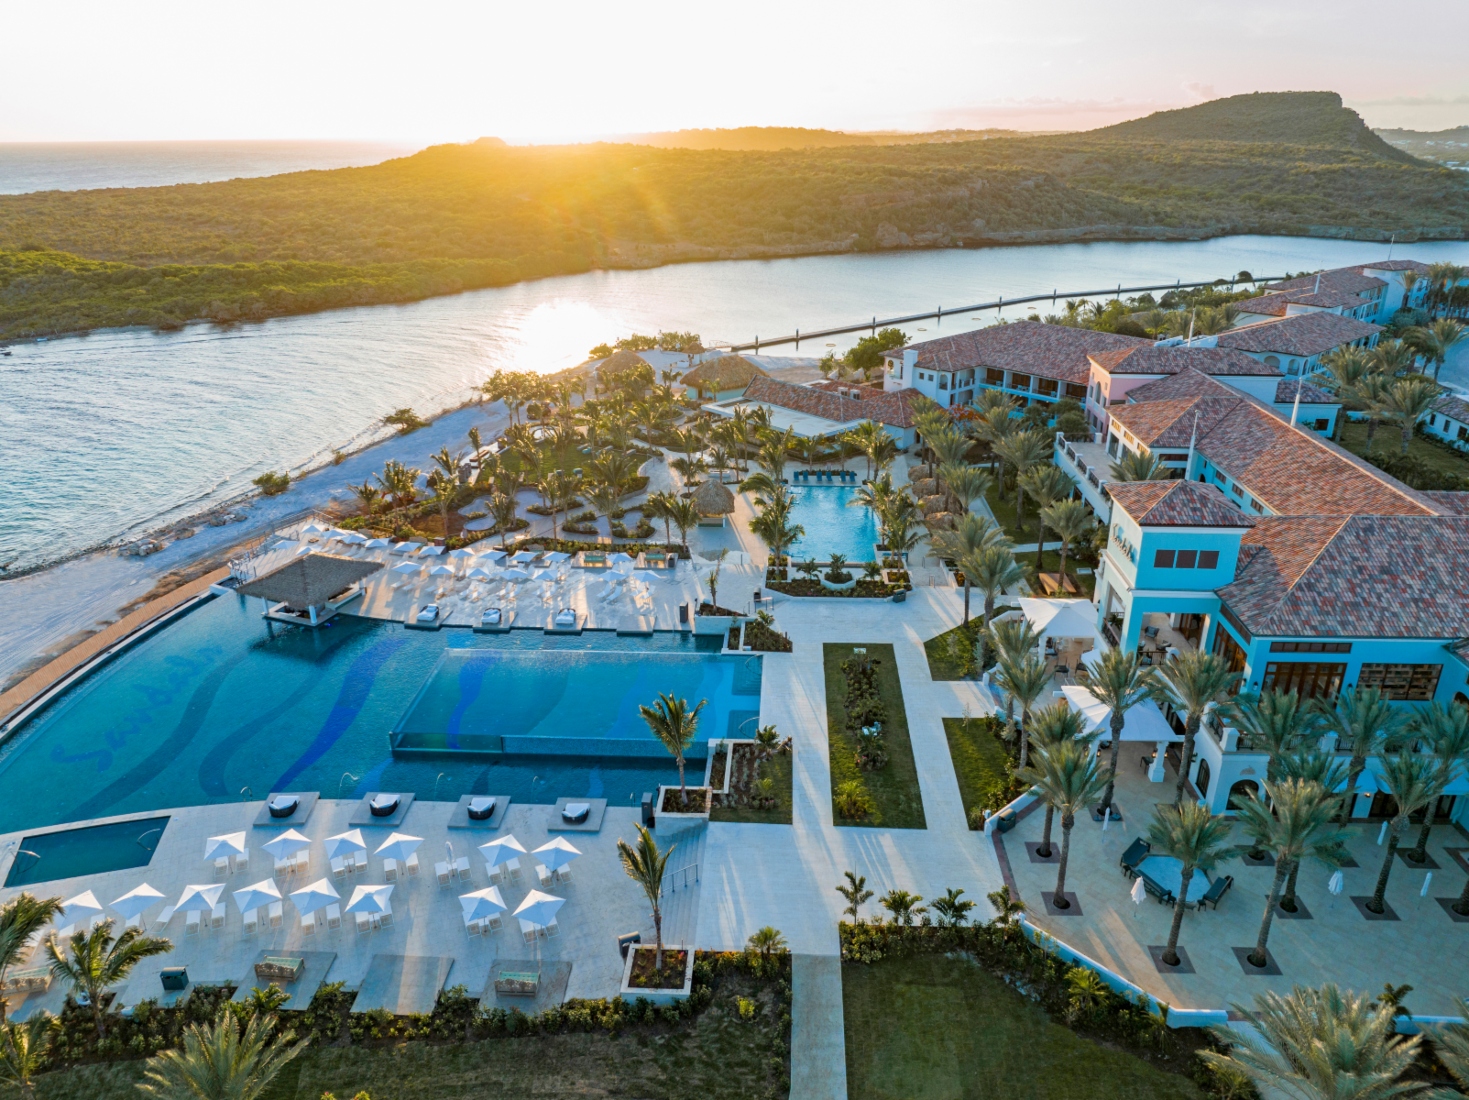 Top Travel Tips for Sandals Royal Curaçao: A Sandals Staff Review